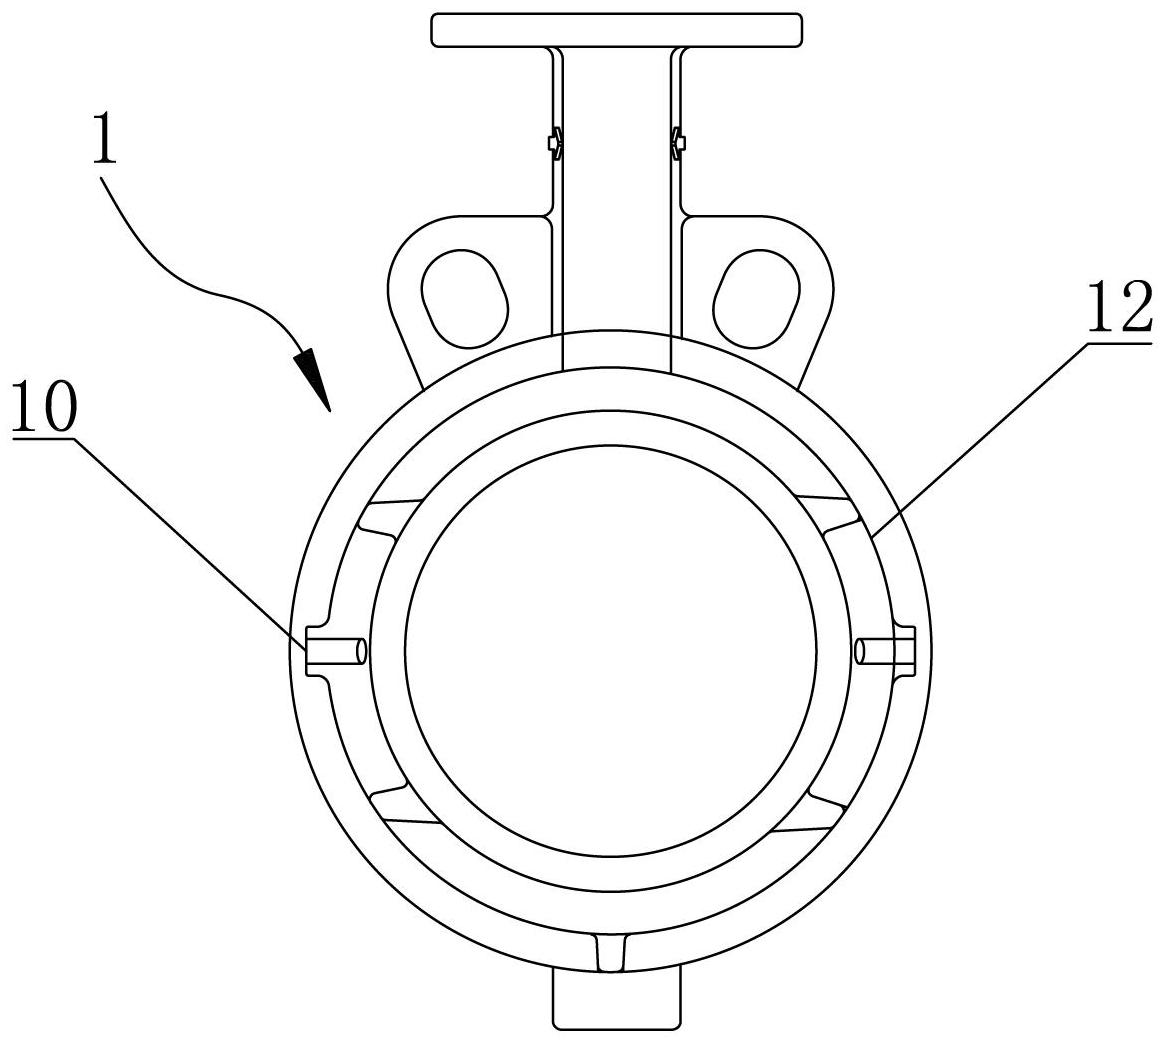 Processing method of butterfly valve sealing mechanism